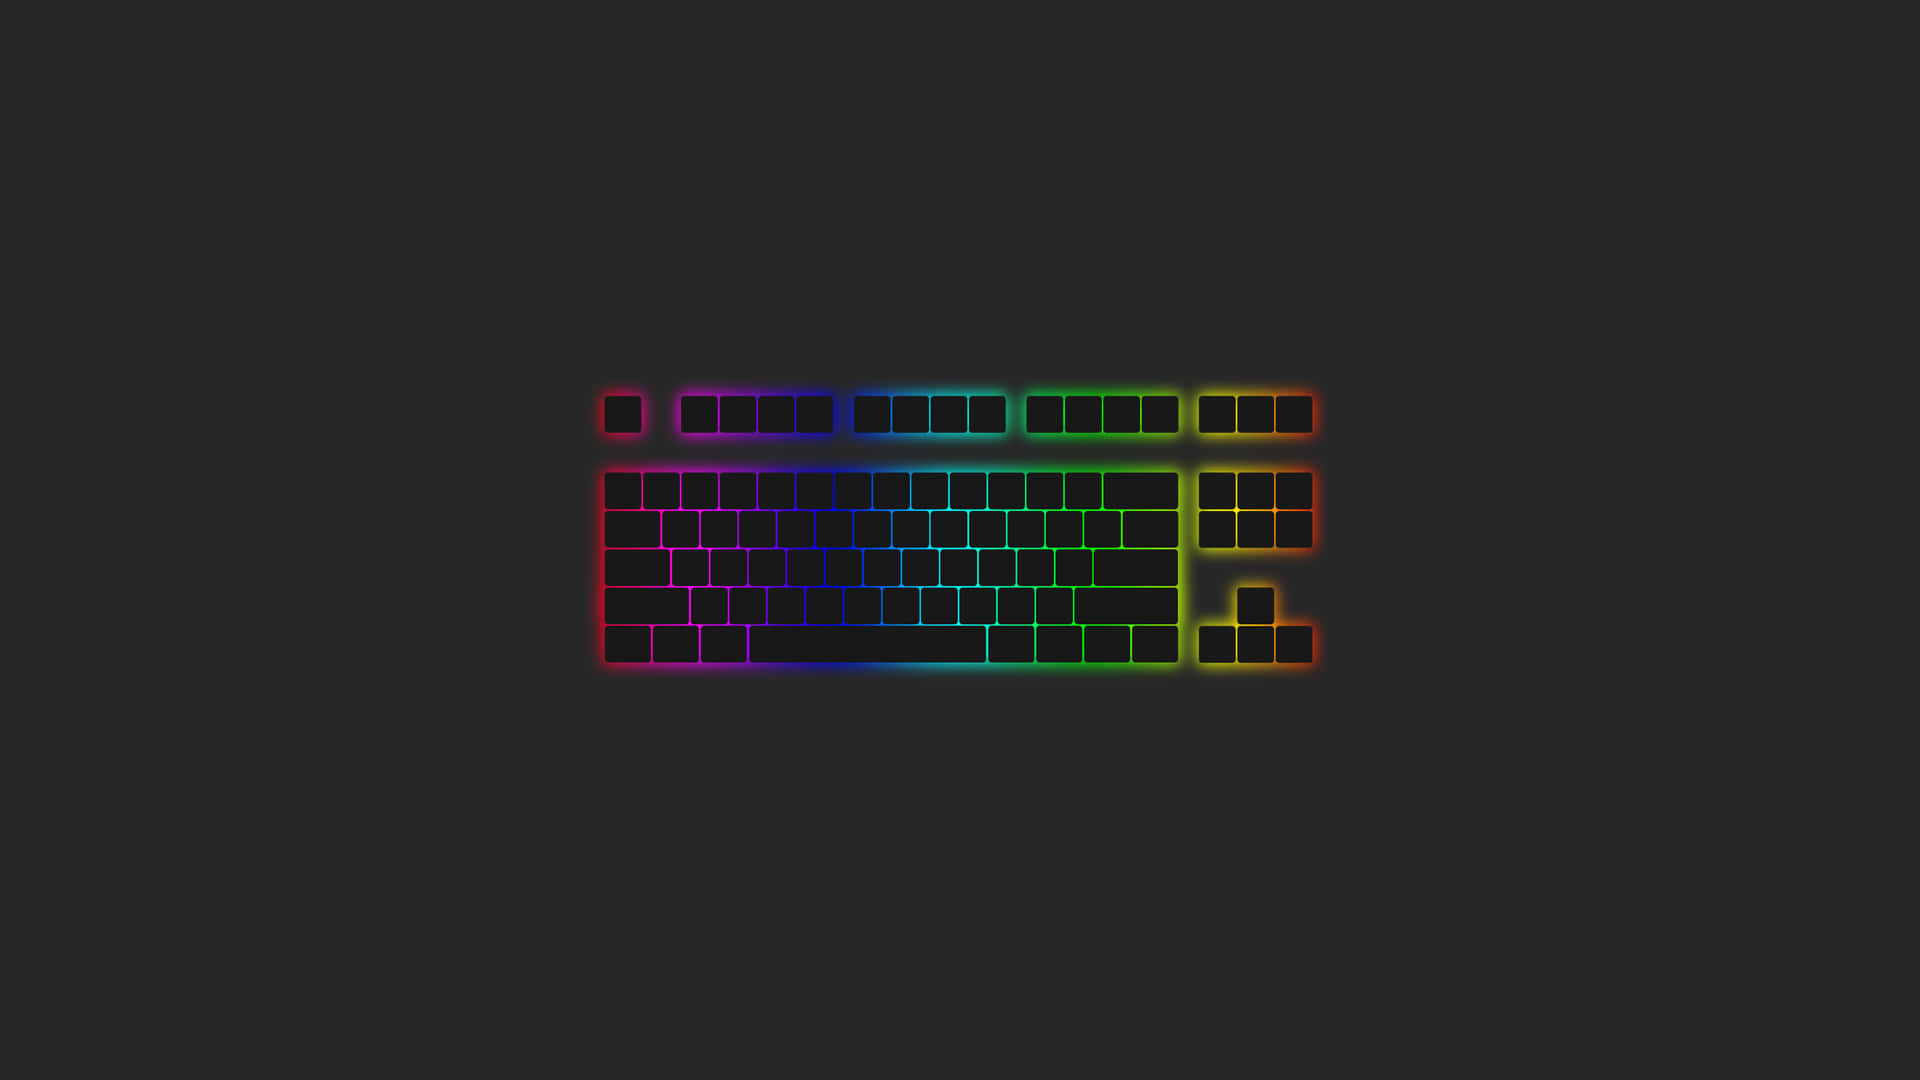 "Cute Keyboard Wallpaper - Add Some Color to Your Desktop!"